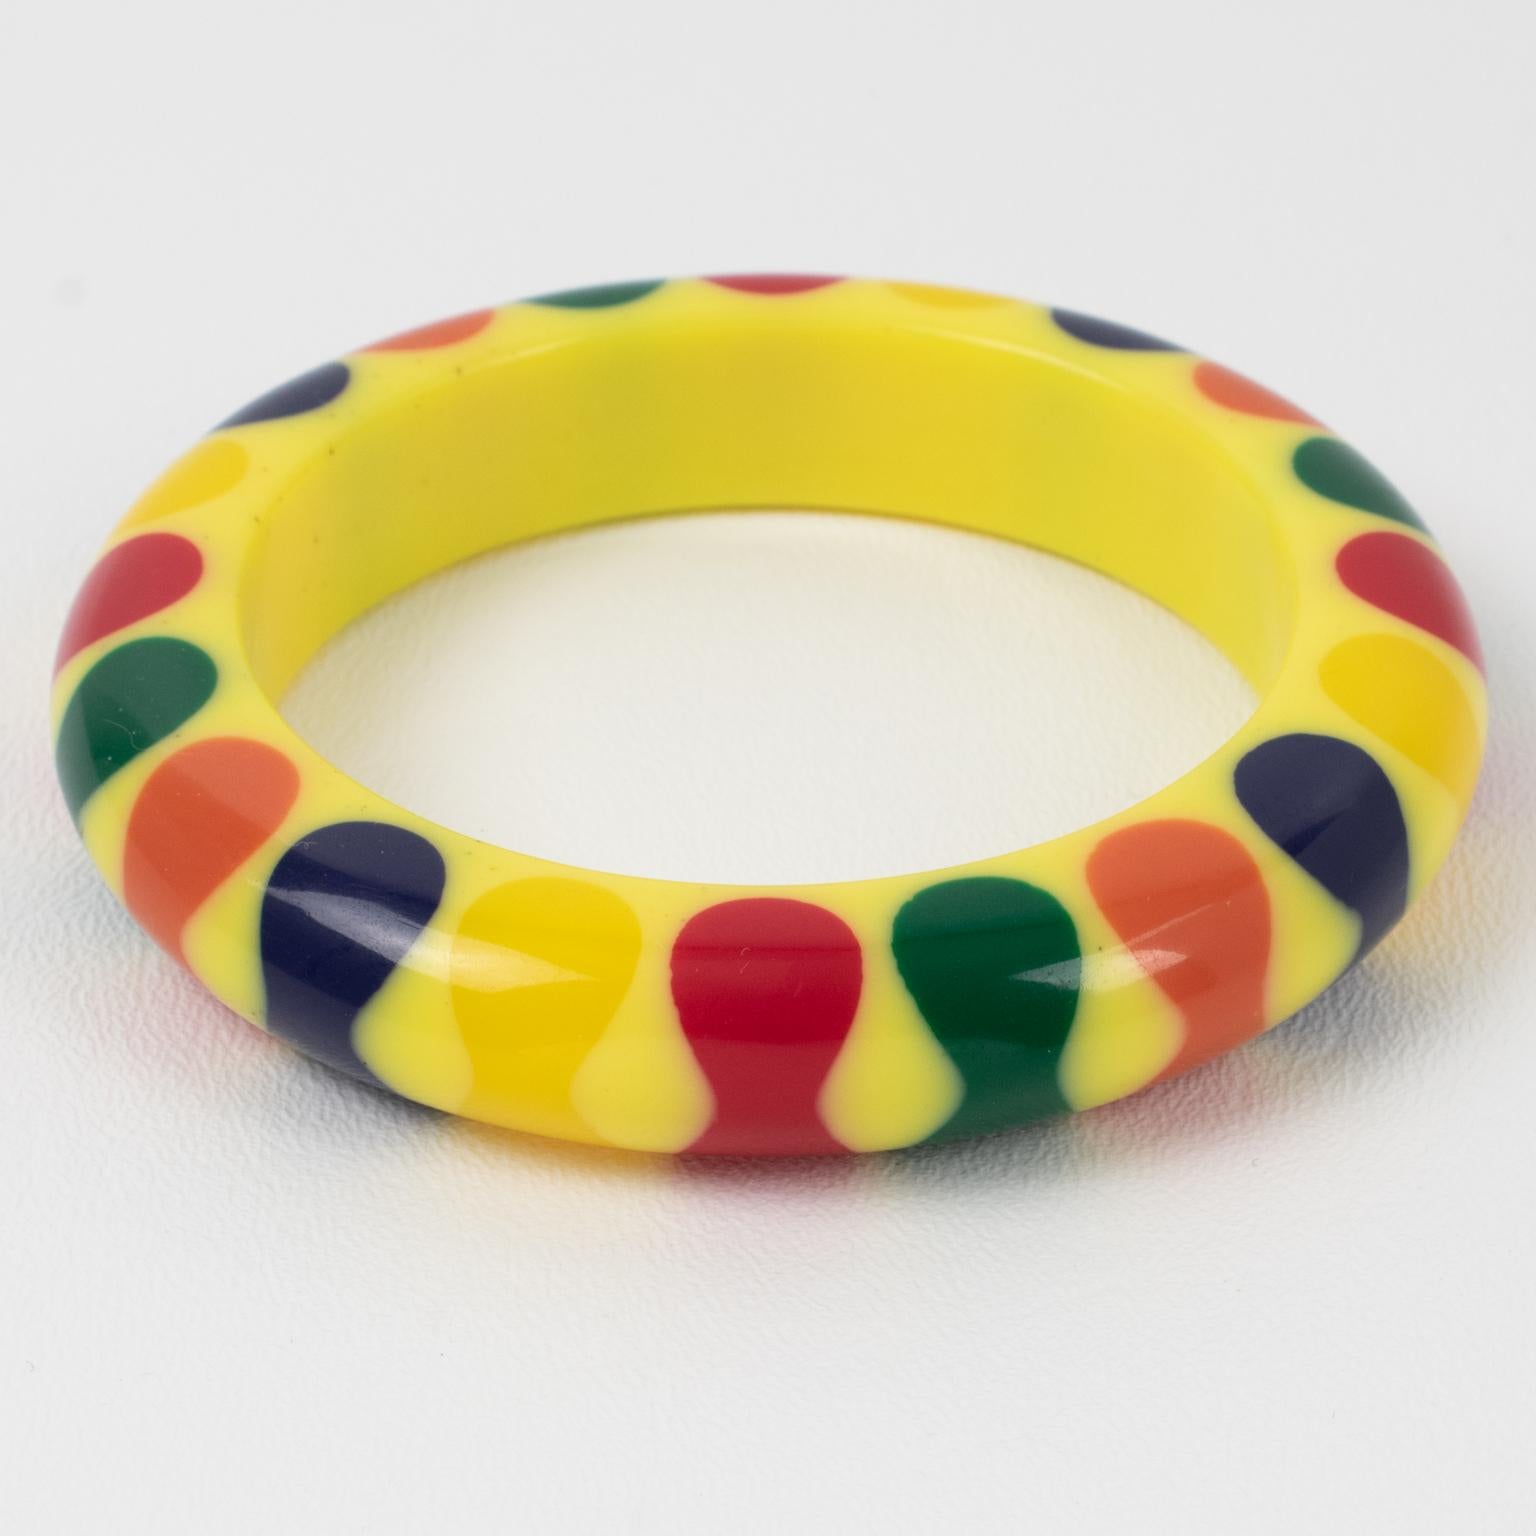 This lovely Judith Evans Lucite or resin bracelet bangle features an iconic gumdrop bowties design. The bracelet is set on a bright yellow background with multicolor laminated bowtie elements. Most of her creations are not signed except for a few